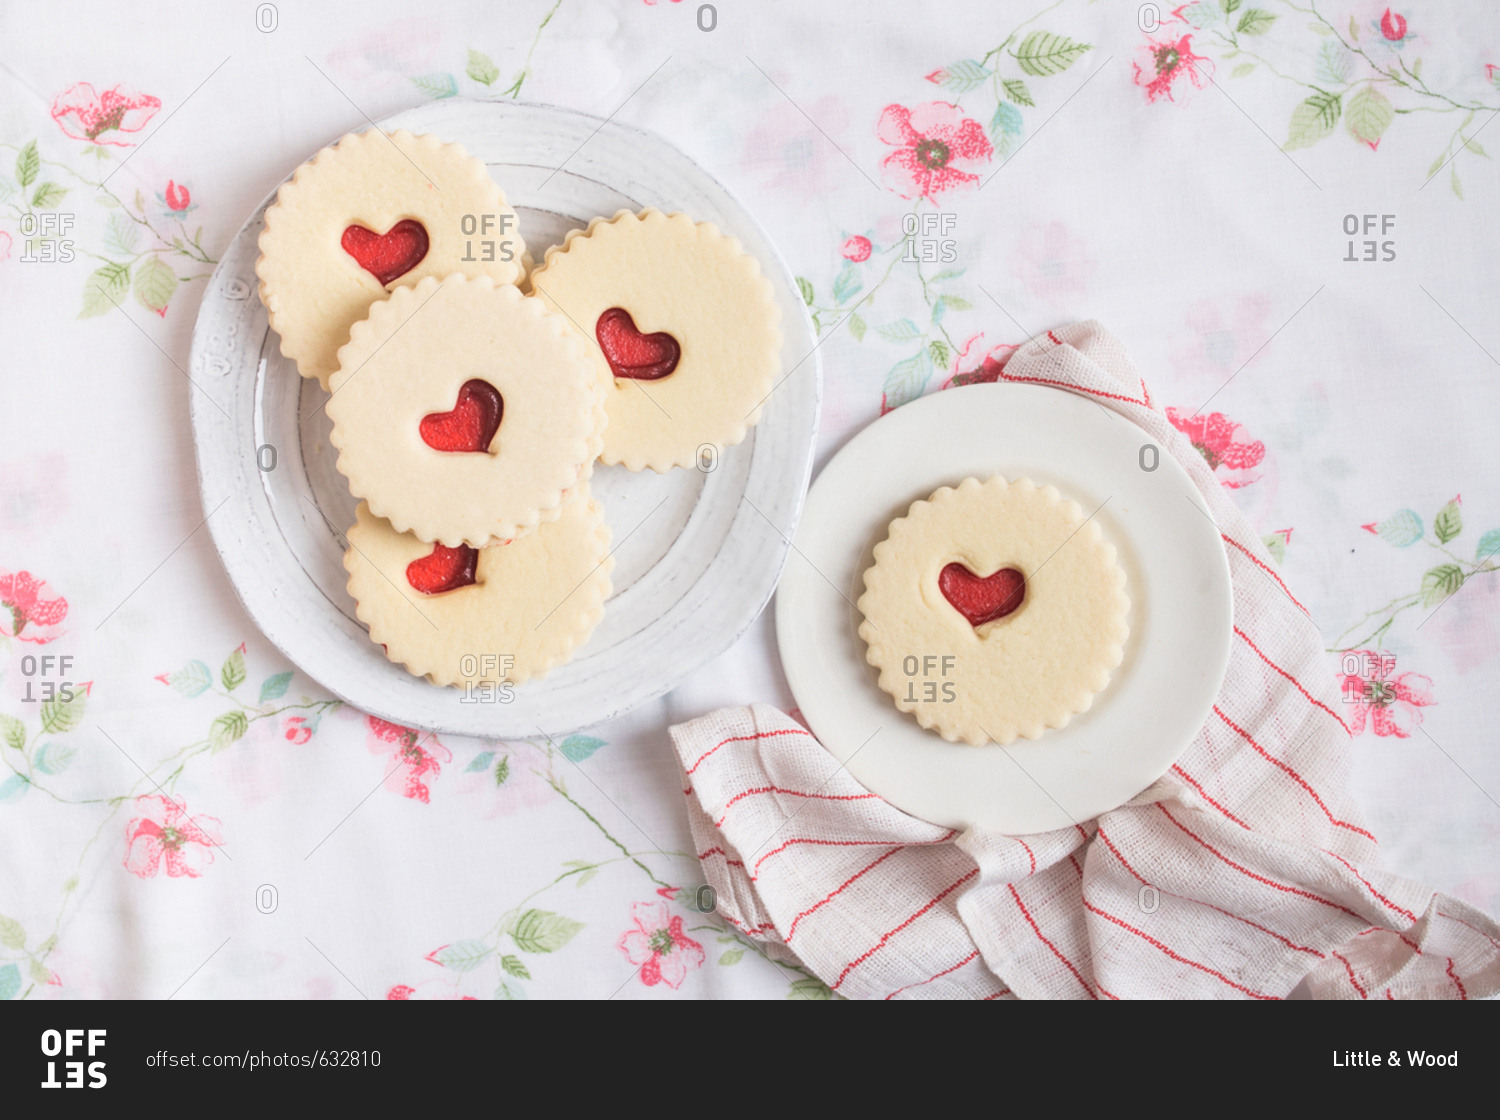 Plates of Valentine's Day cookies with heart shaped design